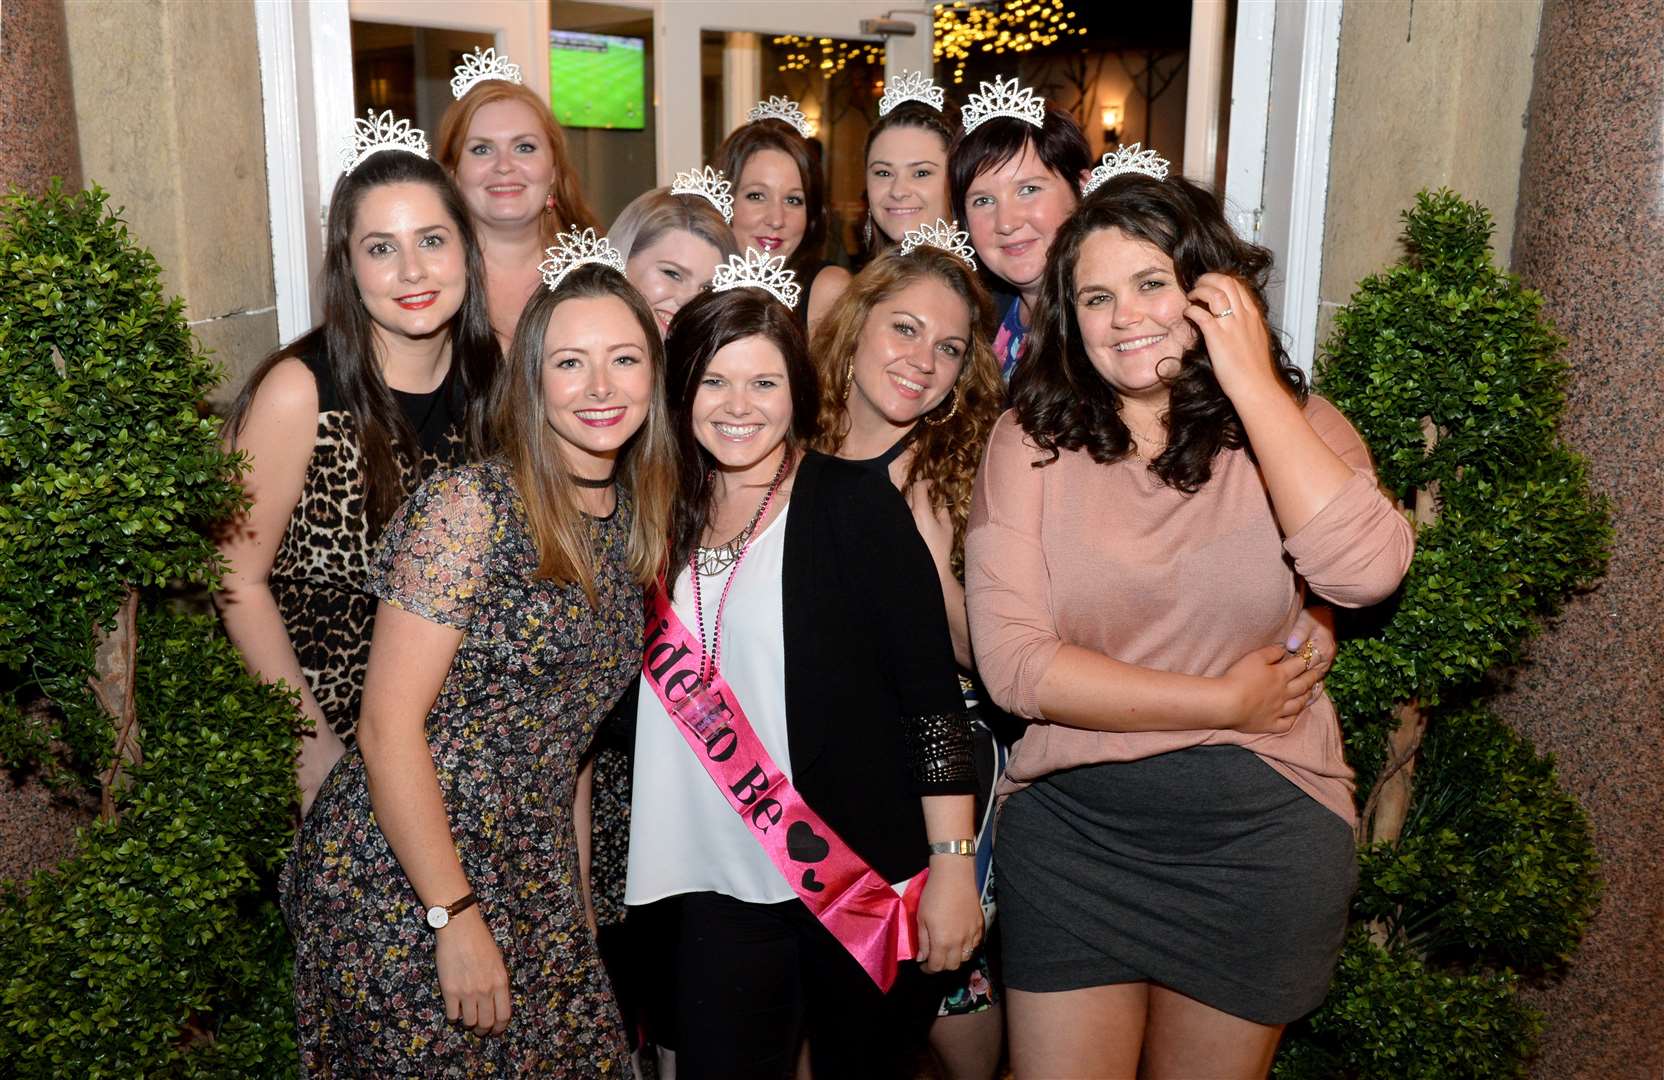 Kaleigh Watson (sash) from Nairn at the White House on her hen night.